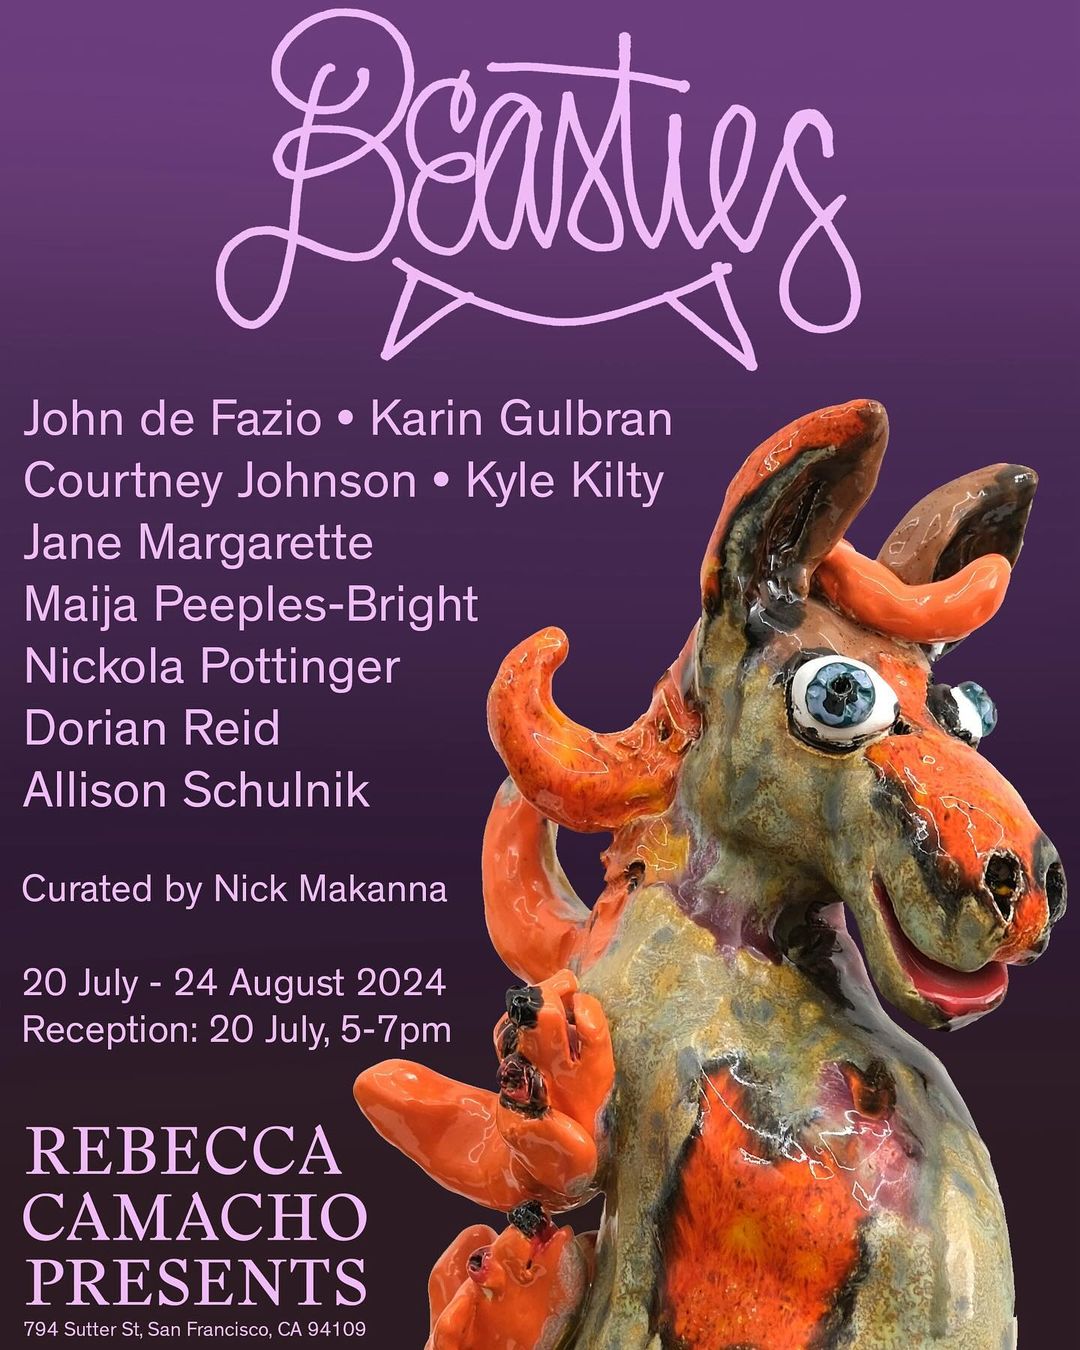 exhibition flyer graphic with a ceramic sculpture of a horse with an orange mane and wide blue eyes in a cartoonish style. Flyer text repeats information from the event description.